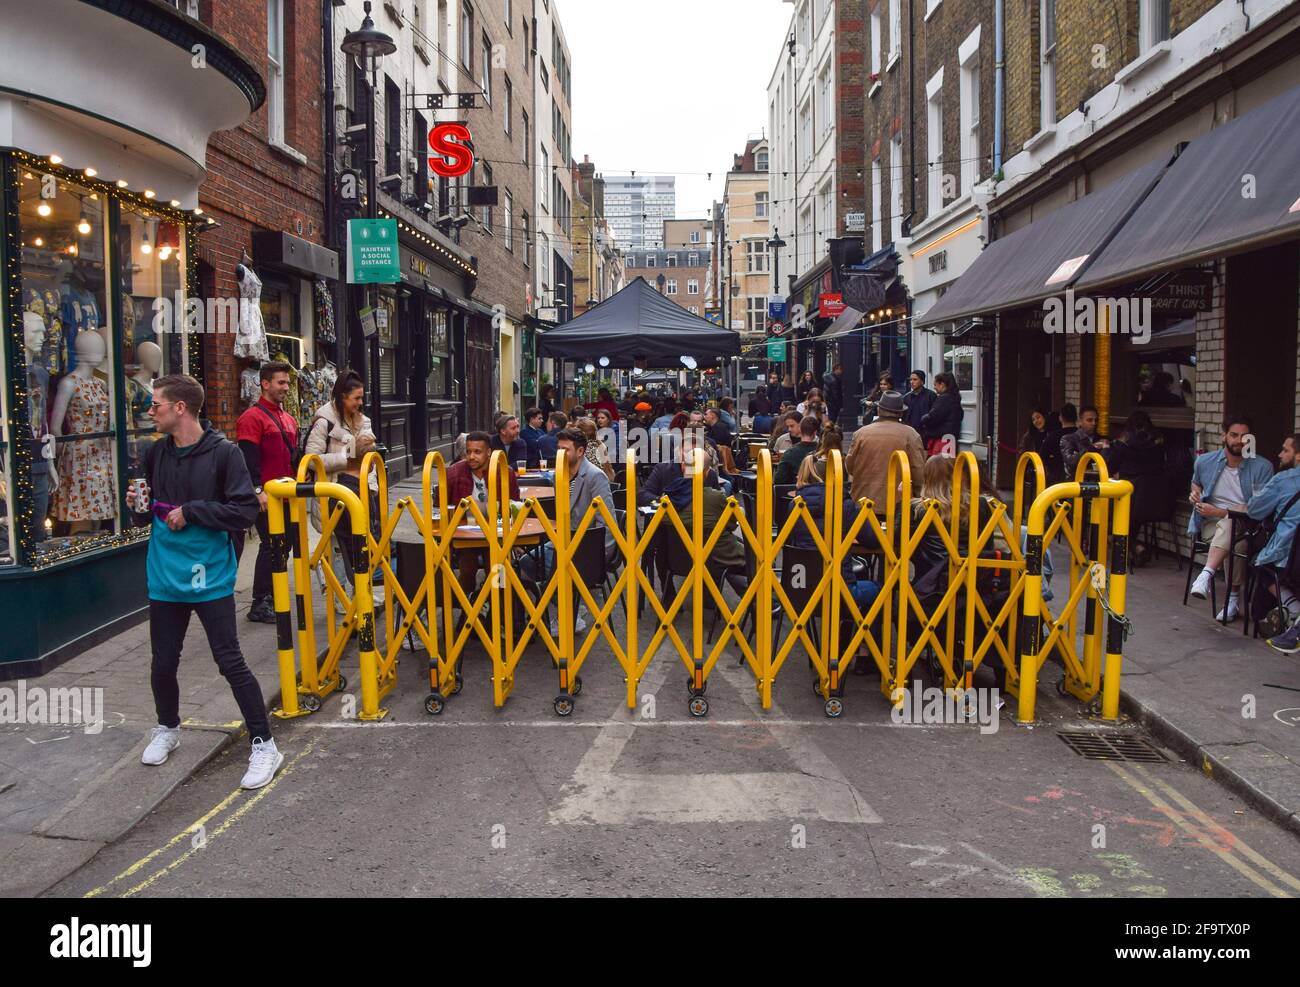 London, UK. 20th Apr, 2021. Busy restaurants and bars seen in Bateman Street, Soho.Several streets in Central London have been blocked for traffic at certain times of the day to allow outdoor, al fresco seating at bars and restaurants. Credit: Vuk Valcic/SOPA Images/ZUMA Wire/Alamy Live News Stock Photo